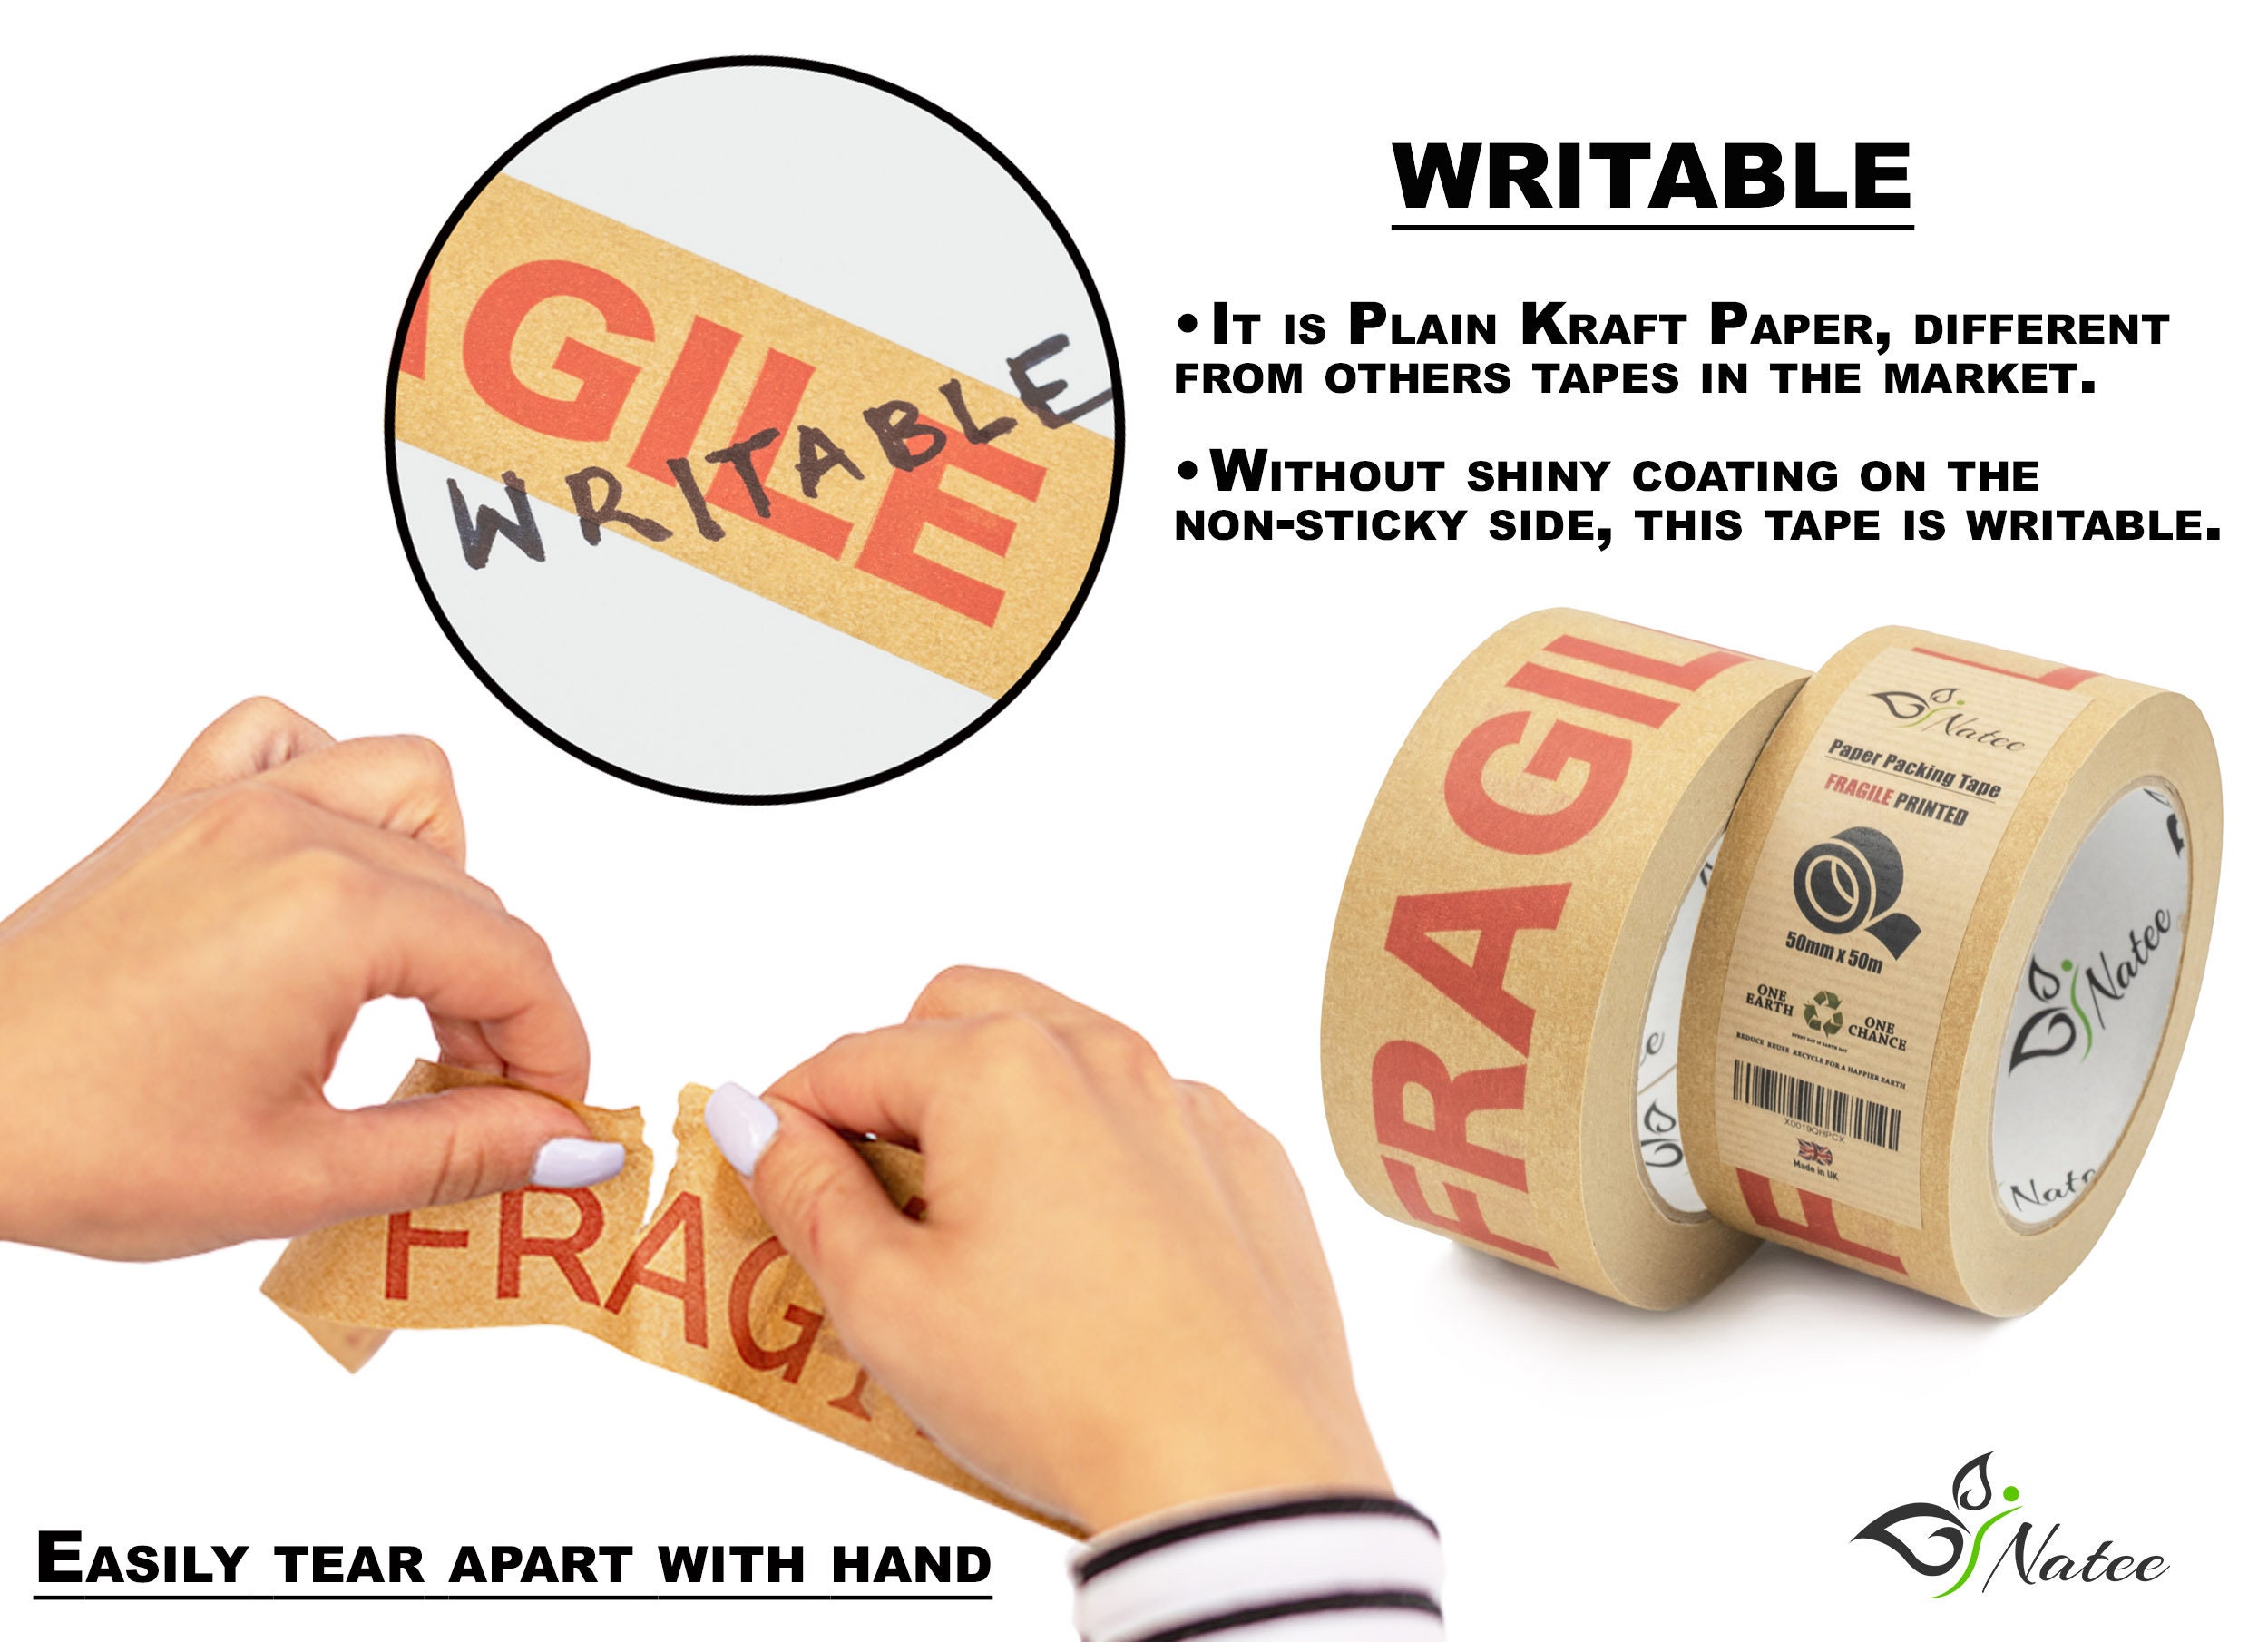 Strong Paper Packaging Tape Eco-friendly Fully Recyclable Fragile Printed  Kraft Paper for Packing Parcels and Boxes 50m X 50mm 